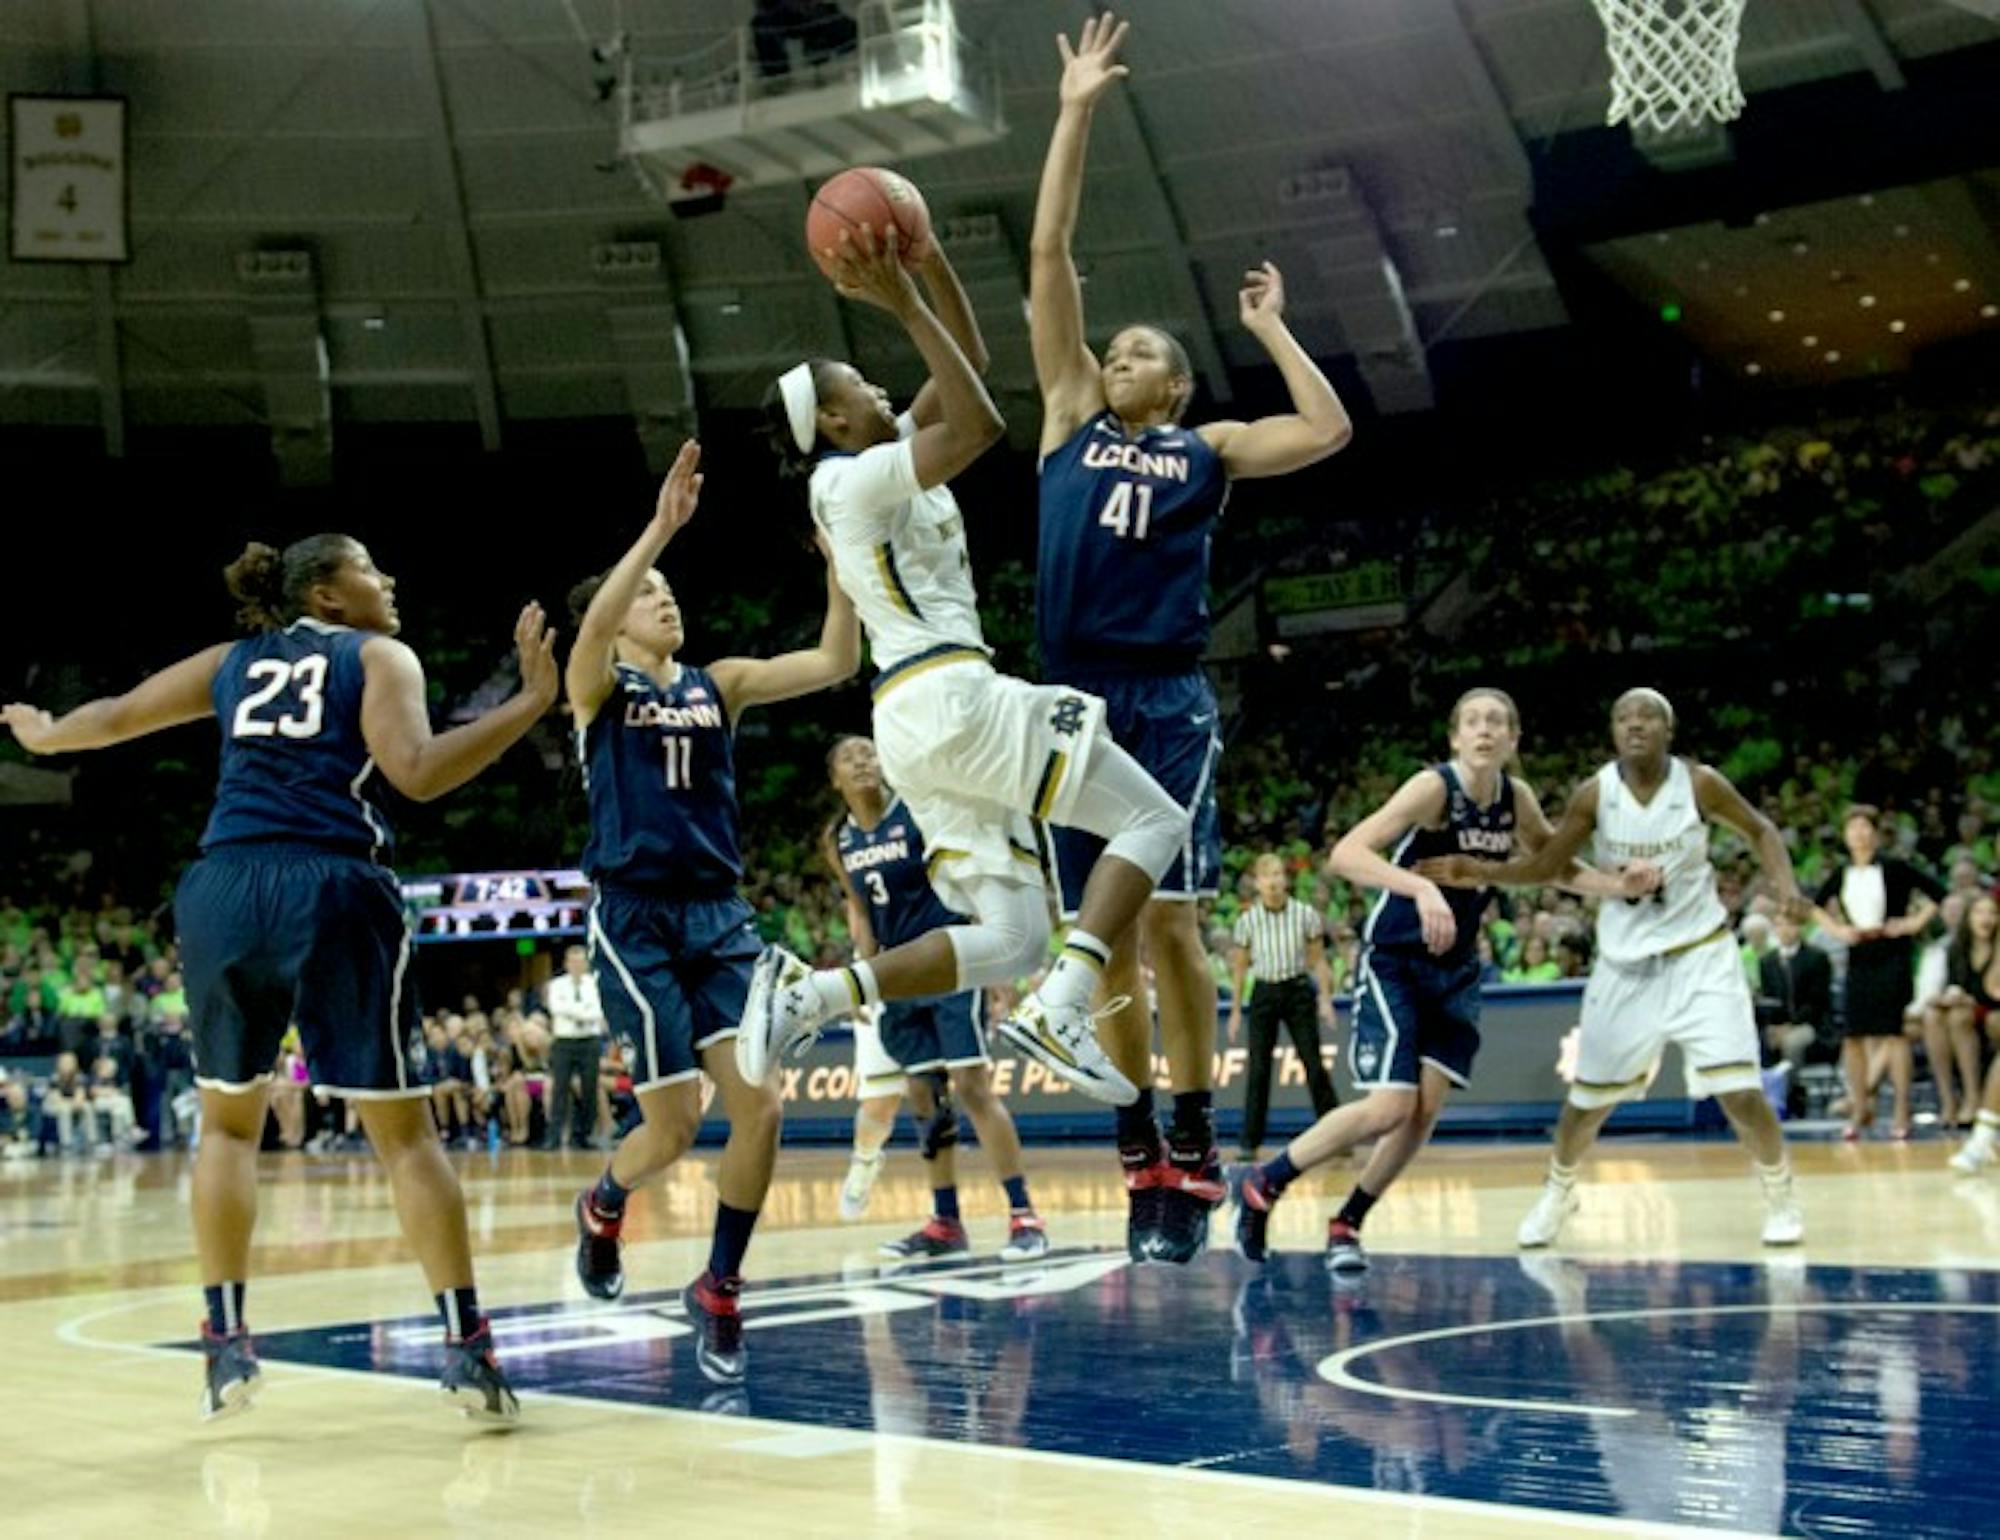 Irish junior guard Jewell Loyd shoots a layup during Notre Dame’s 76-58 loss to Connecticut on Dec. 6 at Purcell Pavilion.